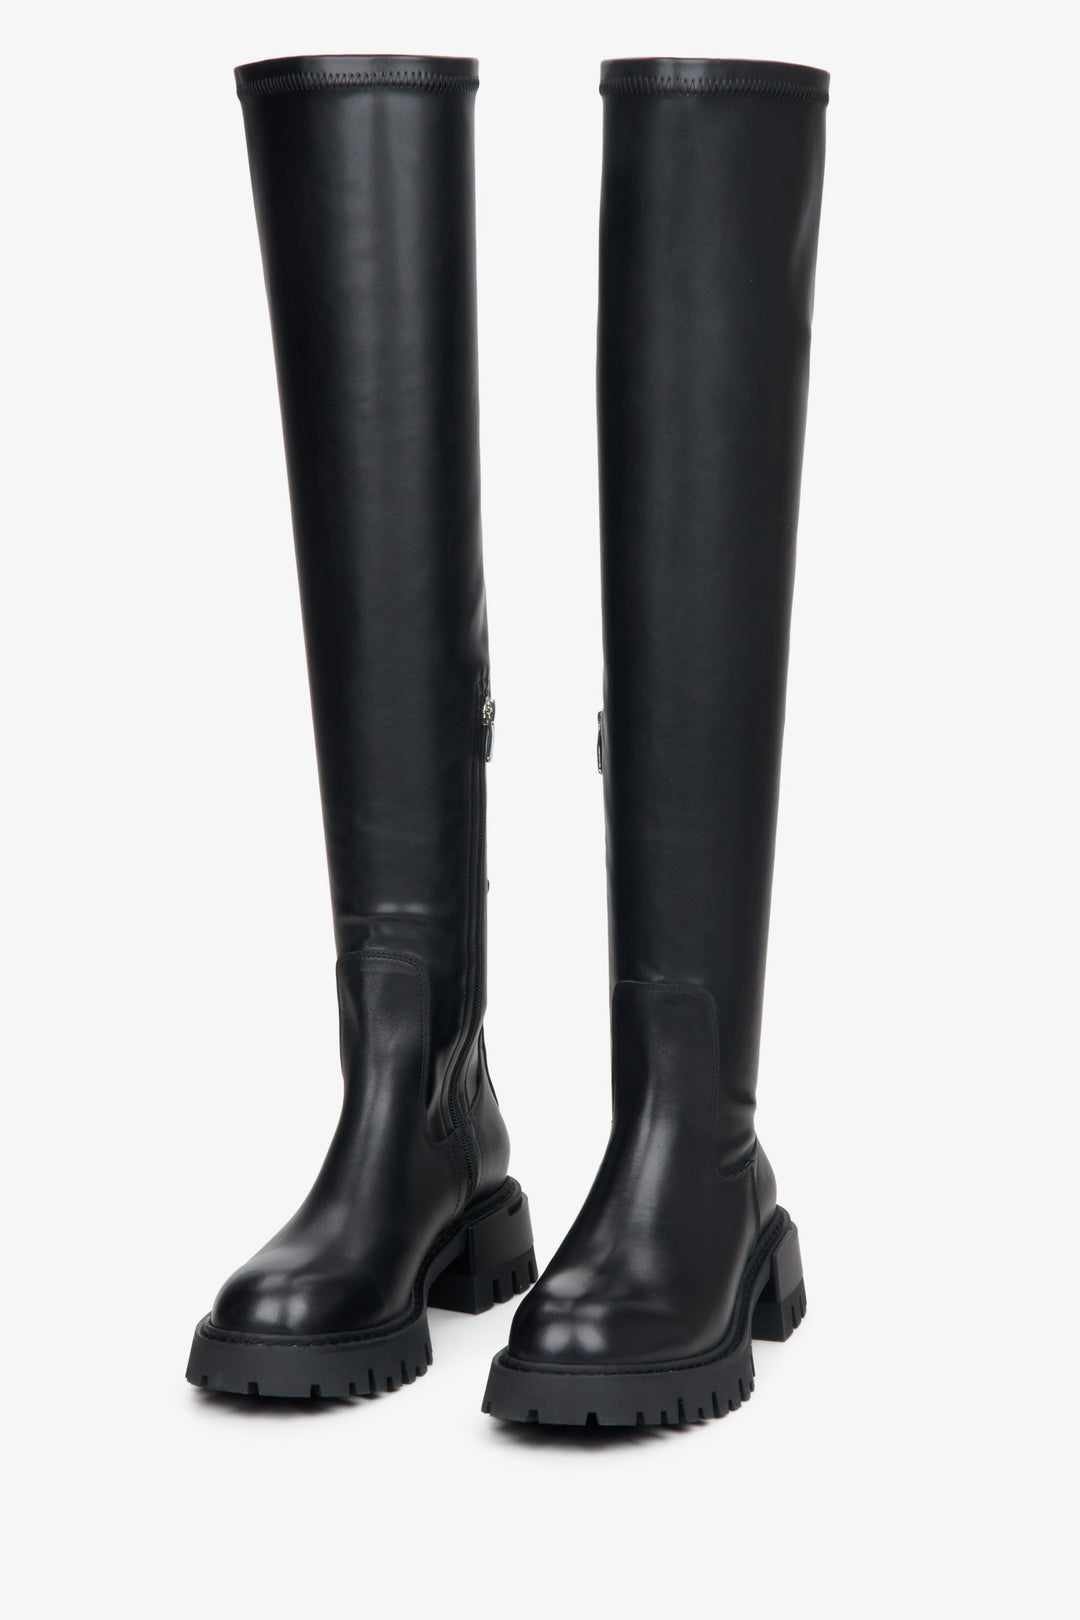 Black leather high-knee women's boots by Estro.